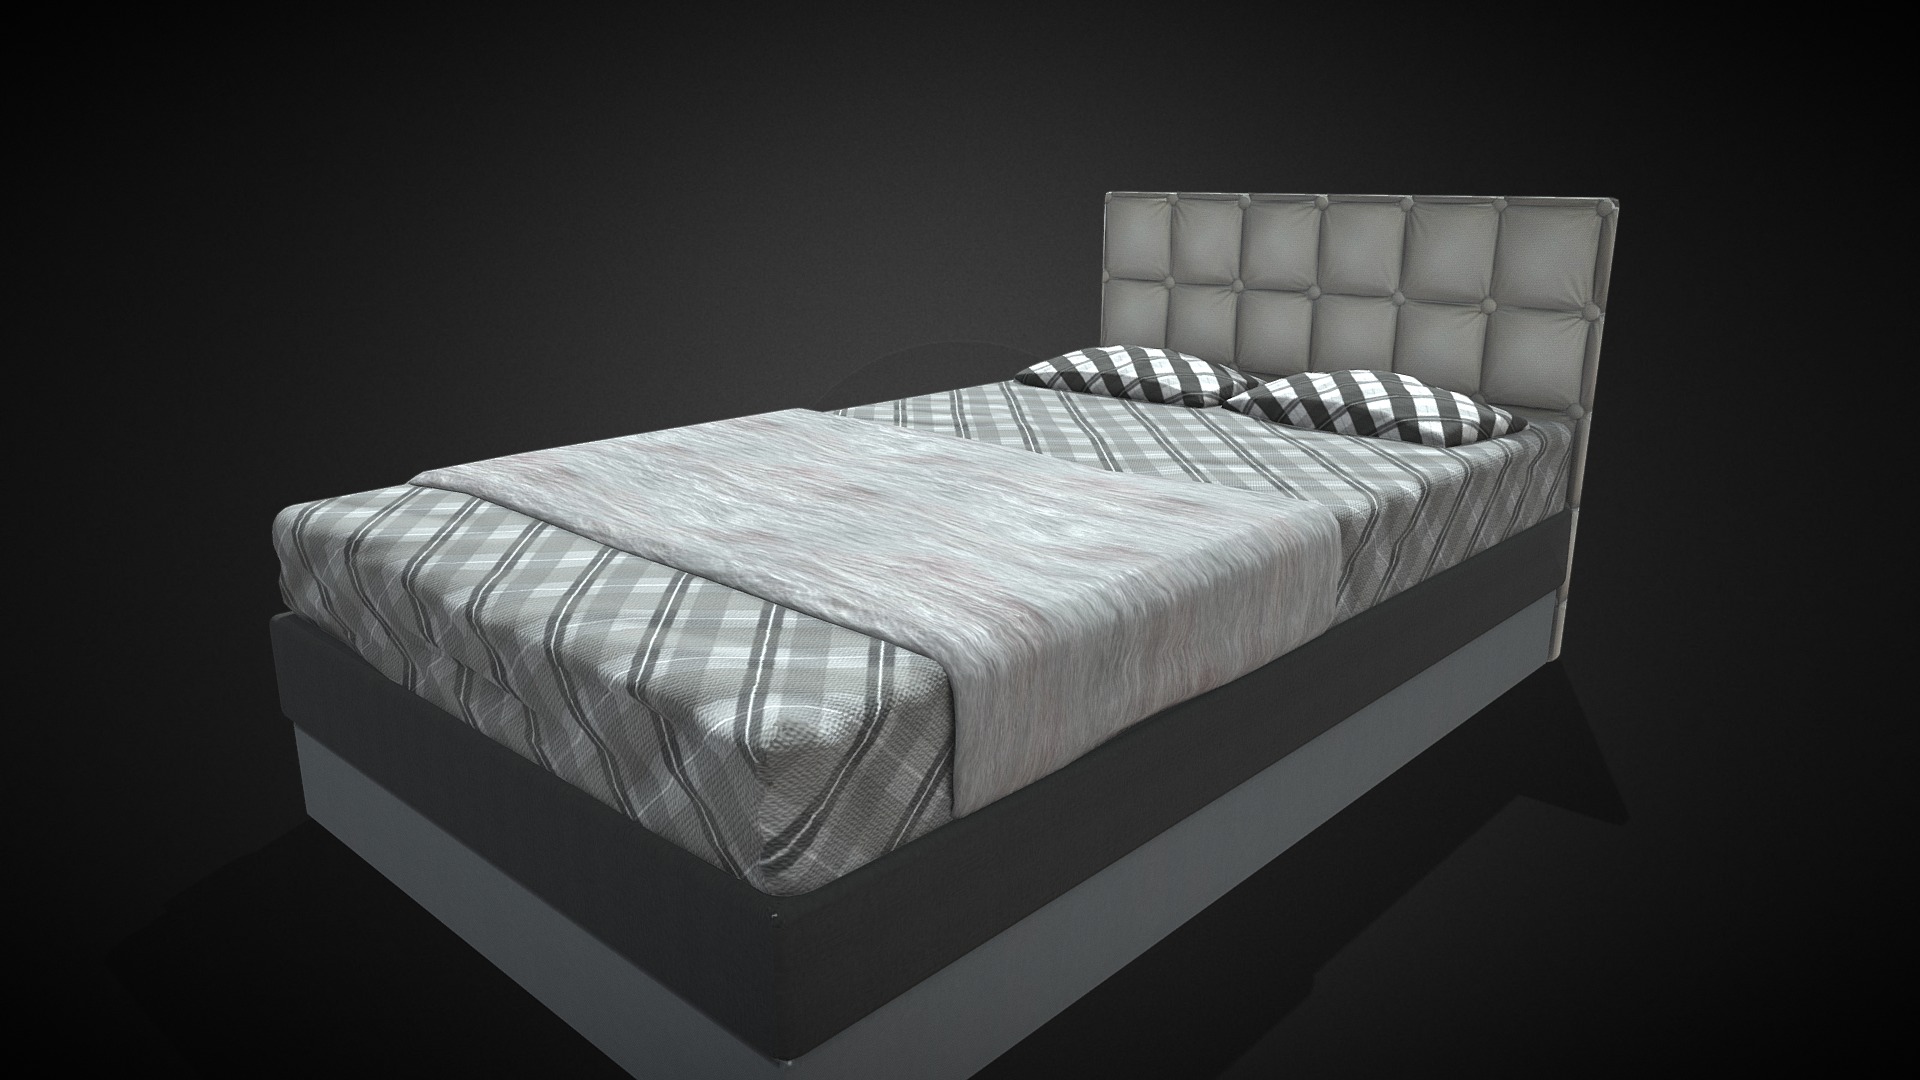 3D model Lit_moderne – Modern_Bed - This is a 3D model of the Lit_moderne - Modern_Bed. The 3D model is about a bed with a white cover.